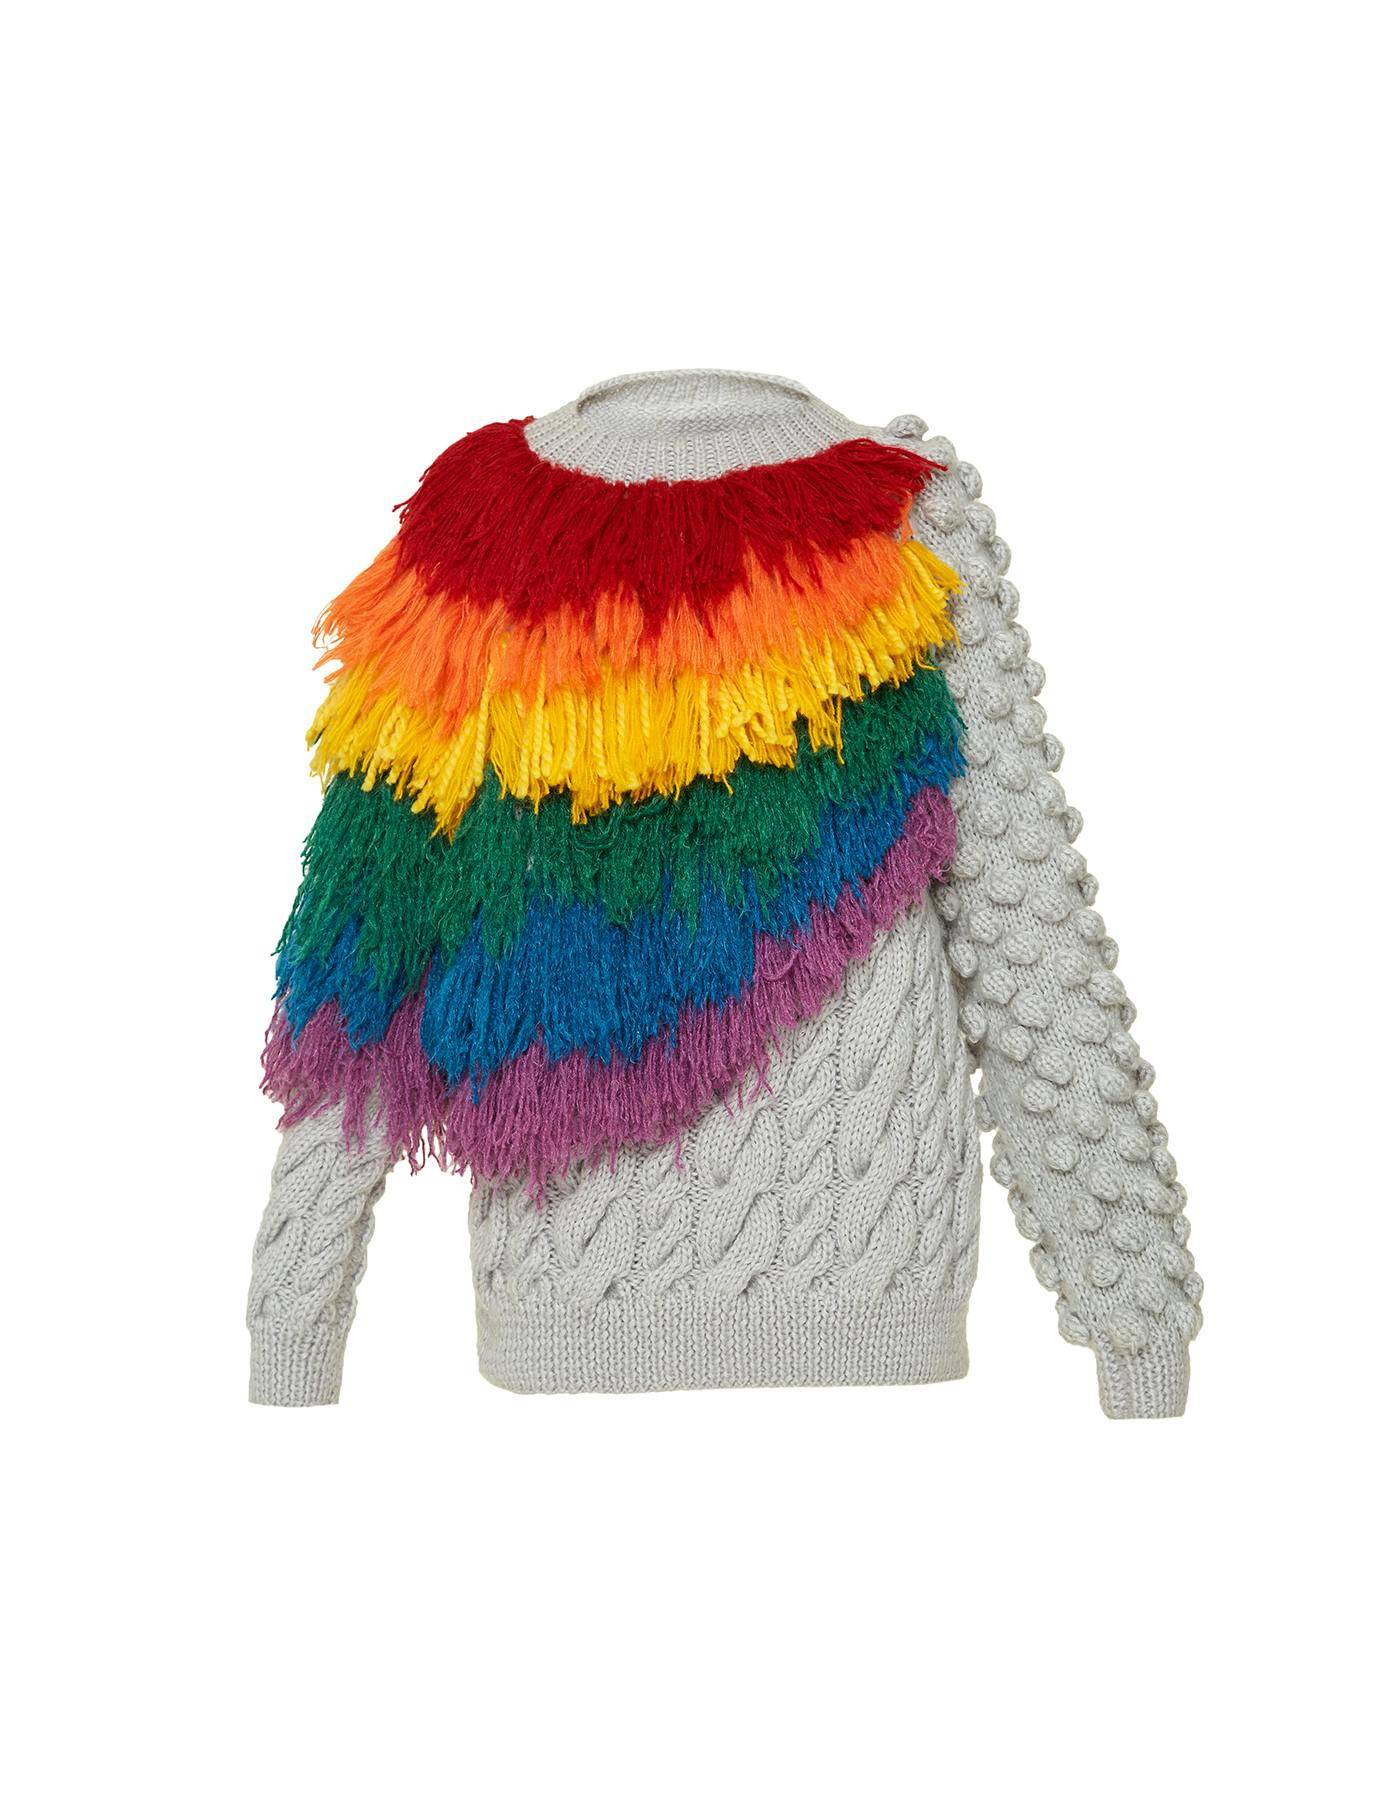 Rainbow knitted sweater, a product by BLIKVANGER